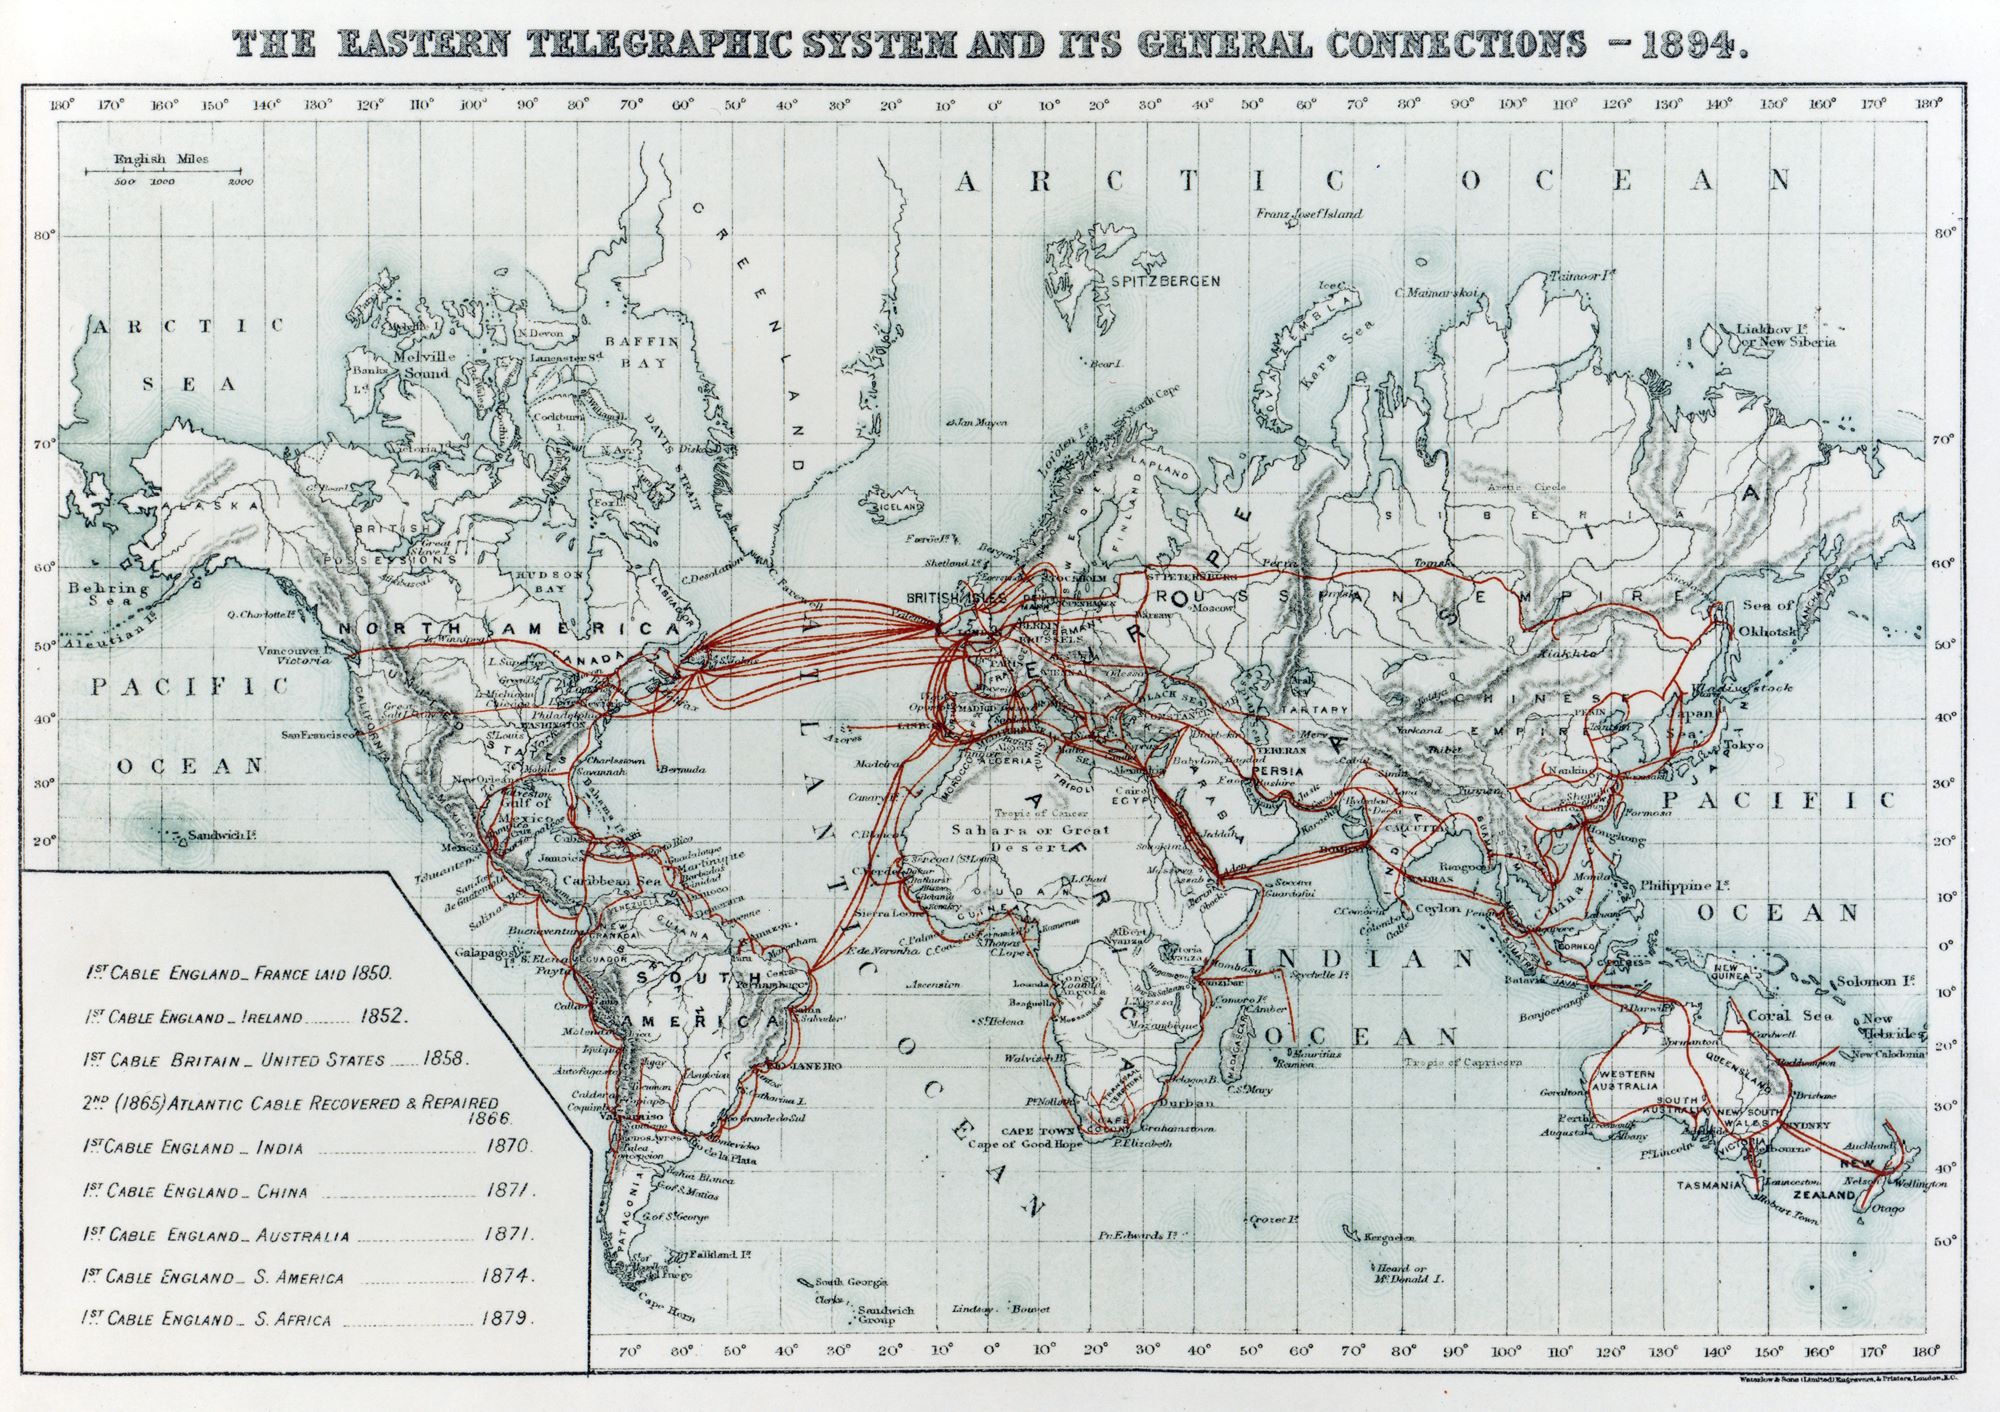 A world map showing telegraph cable routes in 1894